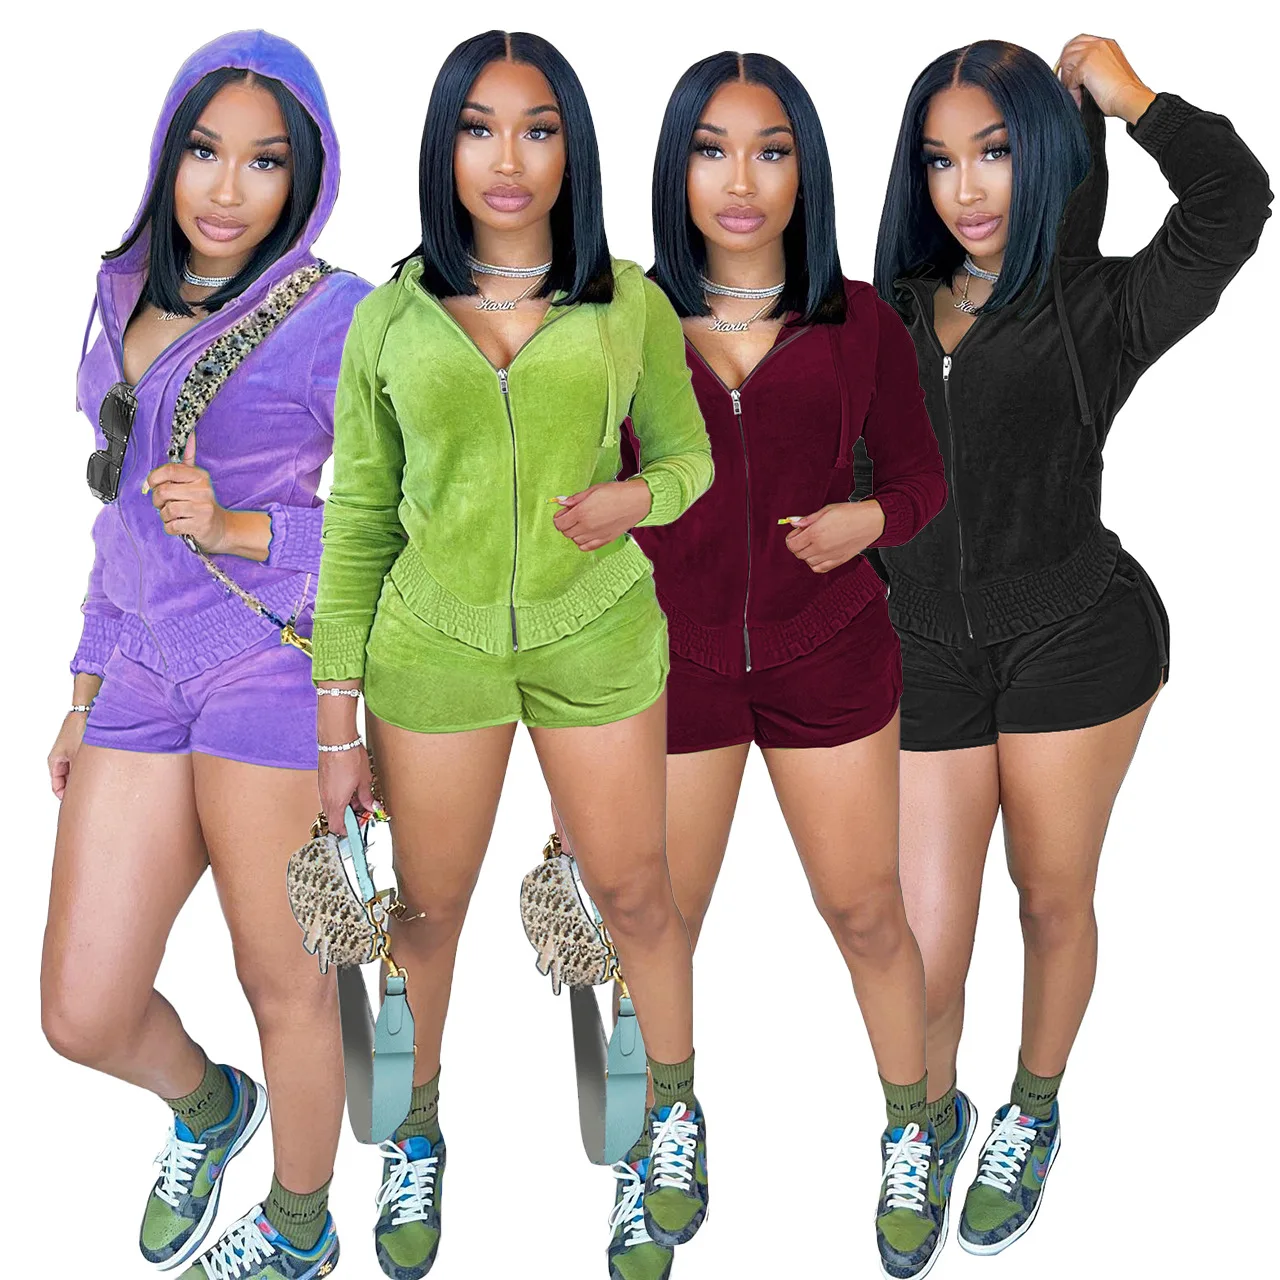 Velvet Hoodies Two Piece Set Stretchy Ruffles Crop Tops Cargo Biker Shorts Pants Winter Fall Casual Clothes Outfits Streetwear maternity bodysuit stretchy close fitting ruffles pregnancy jumpsuits photography studio clothing maternity photography props